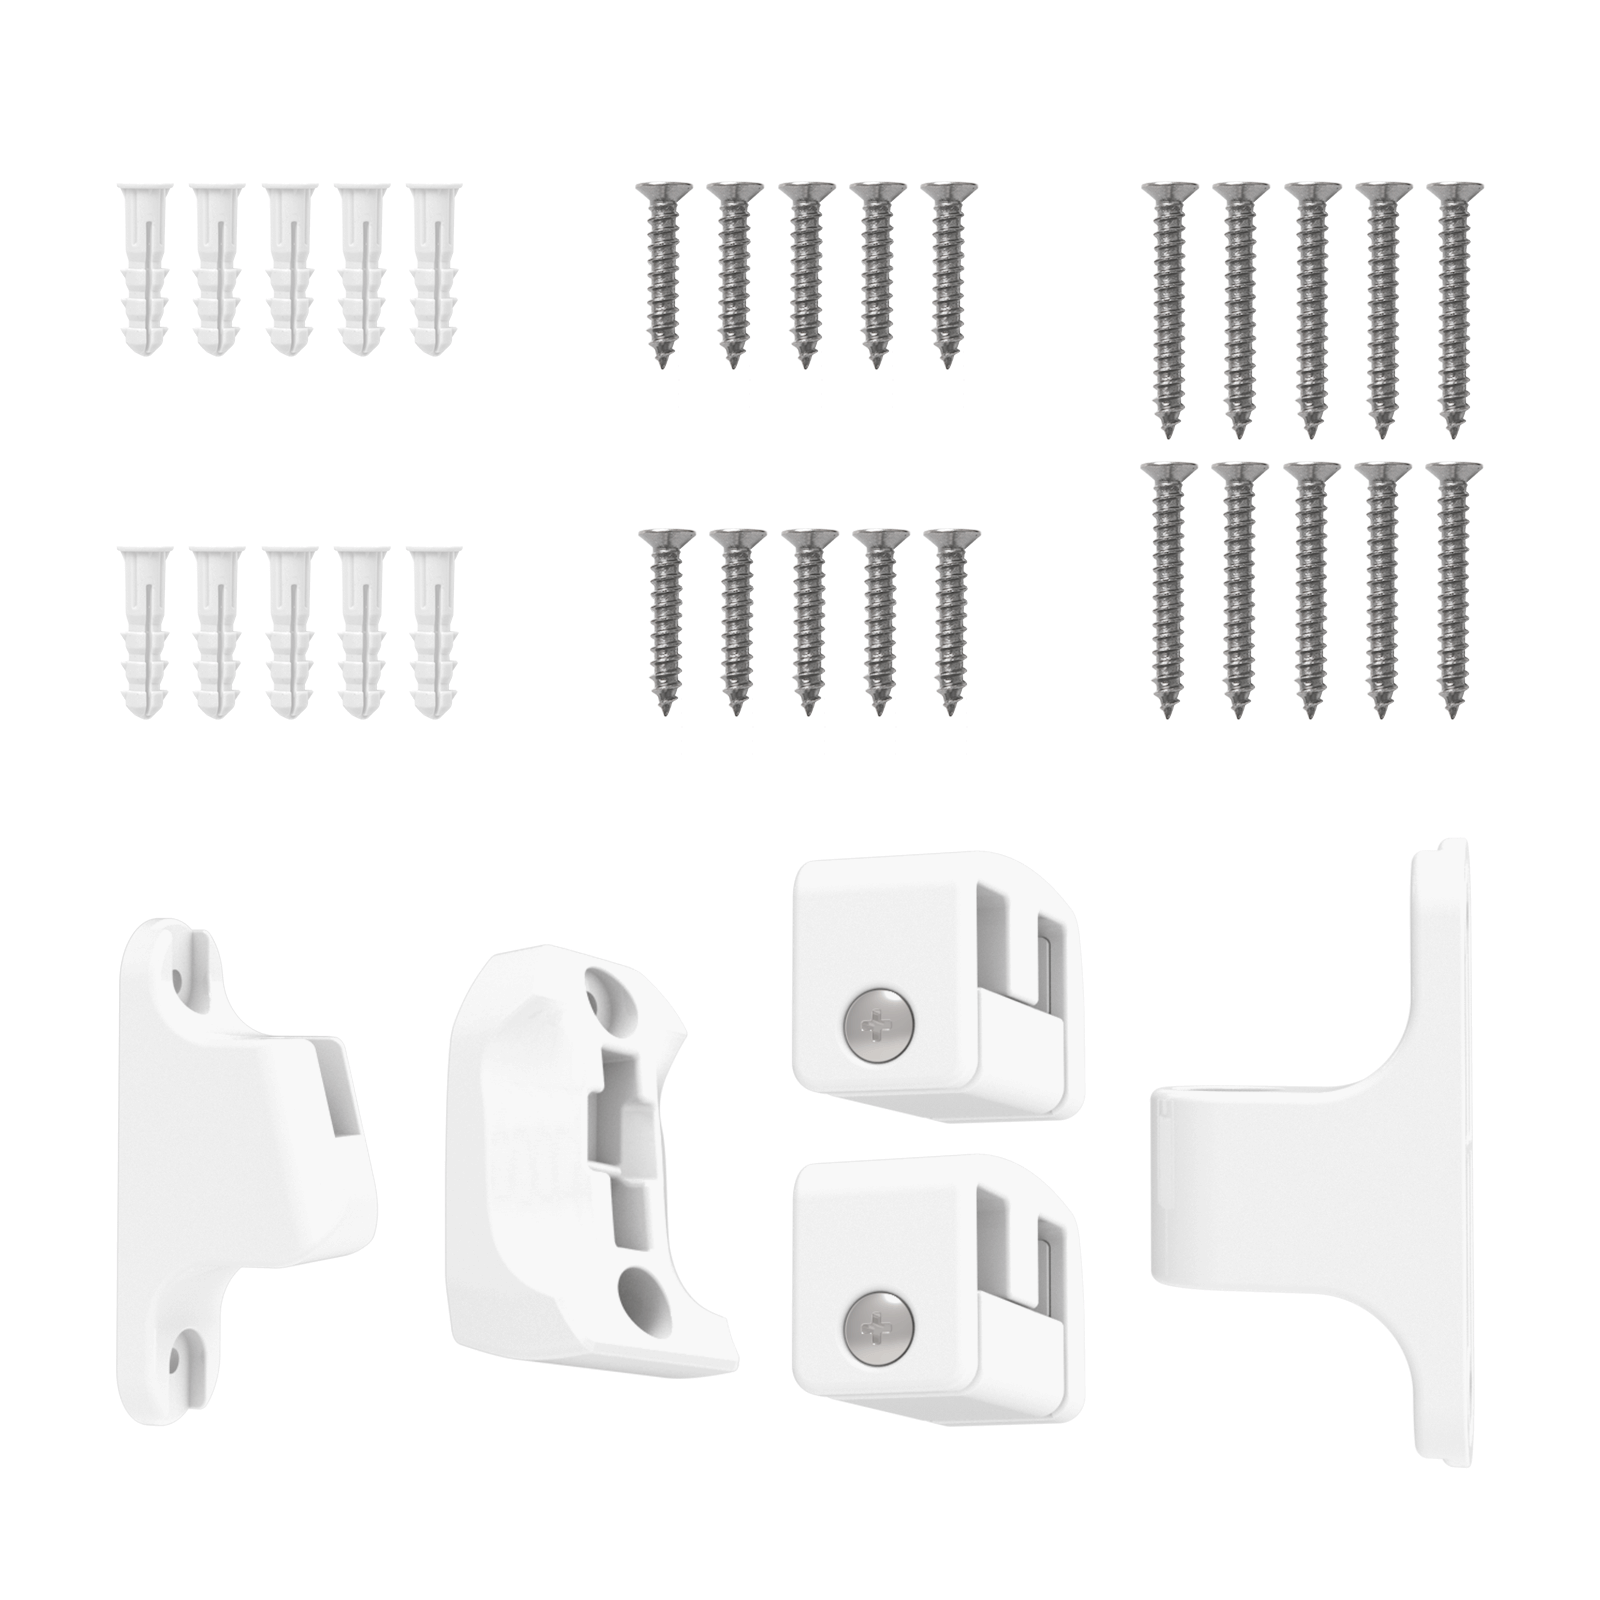 Hole Mounting Kit for Babelio 26-43" Auto Close Baby/Dog Gate for Stairs, Contains Screws